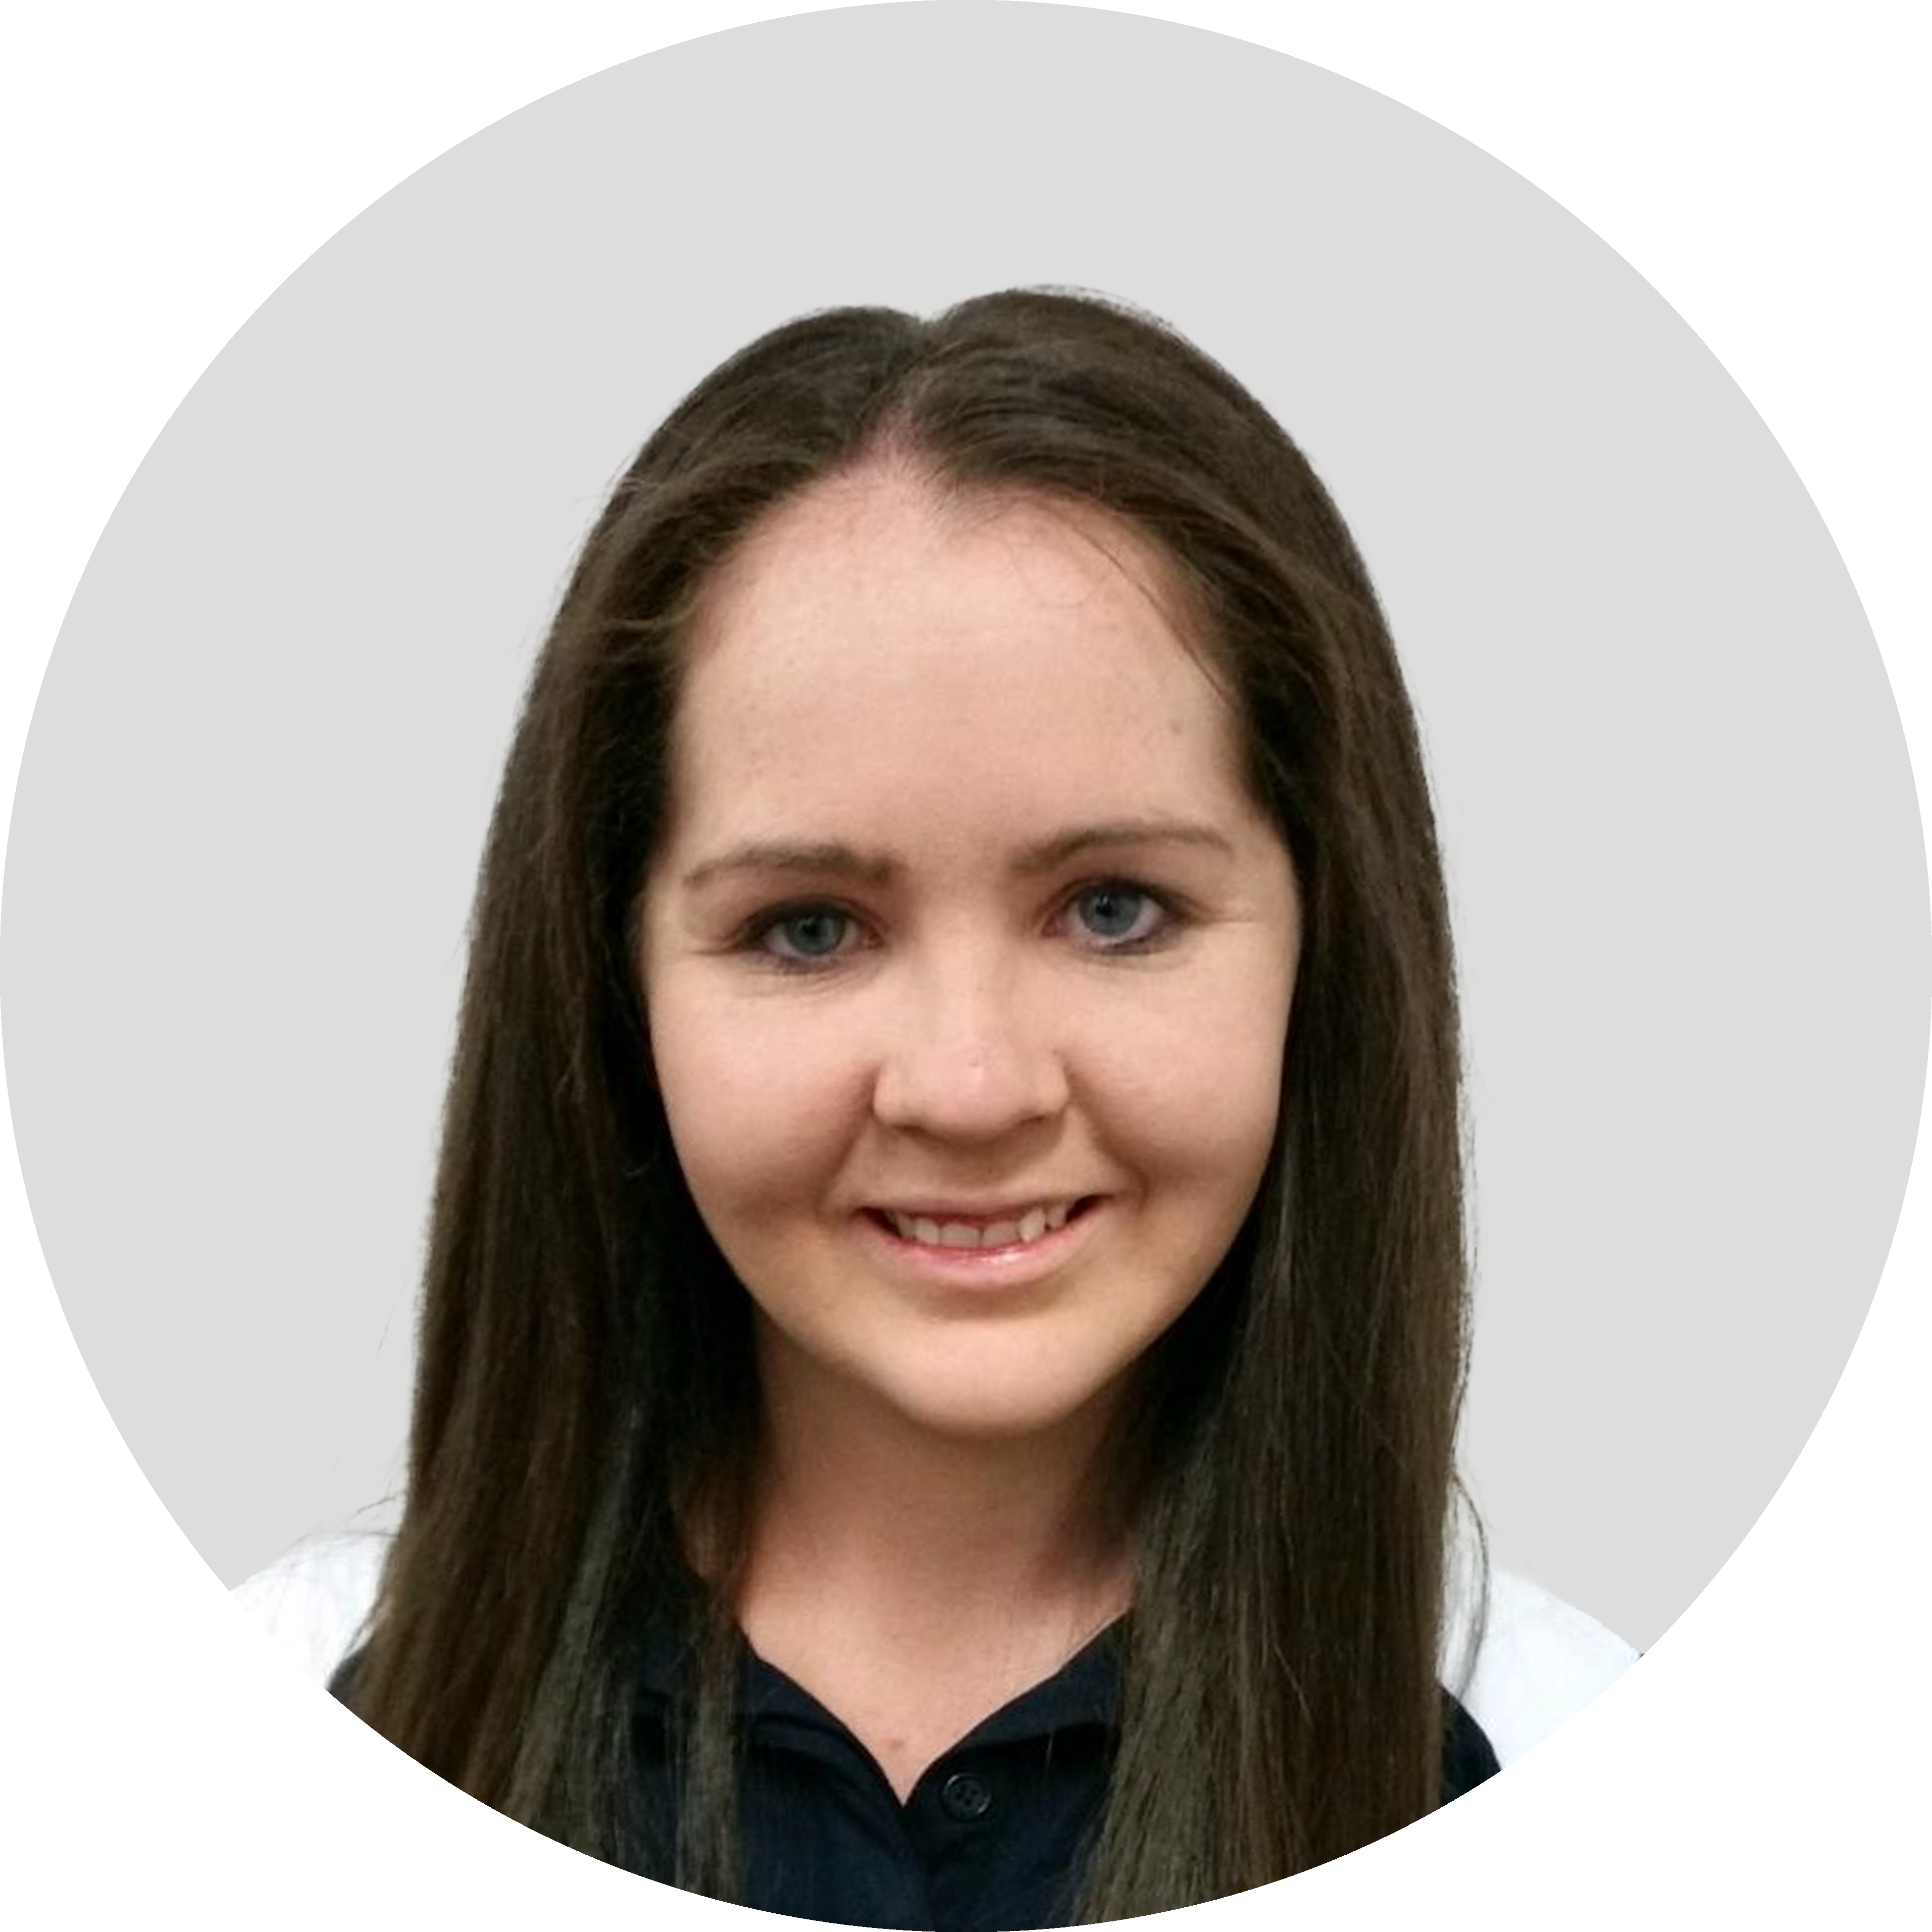 Niki Holding | Exercise Physiologist at Australian Sports Physiotherapy